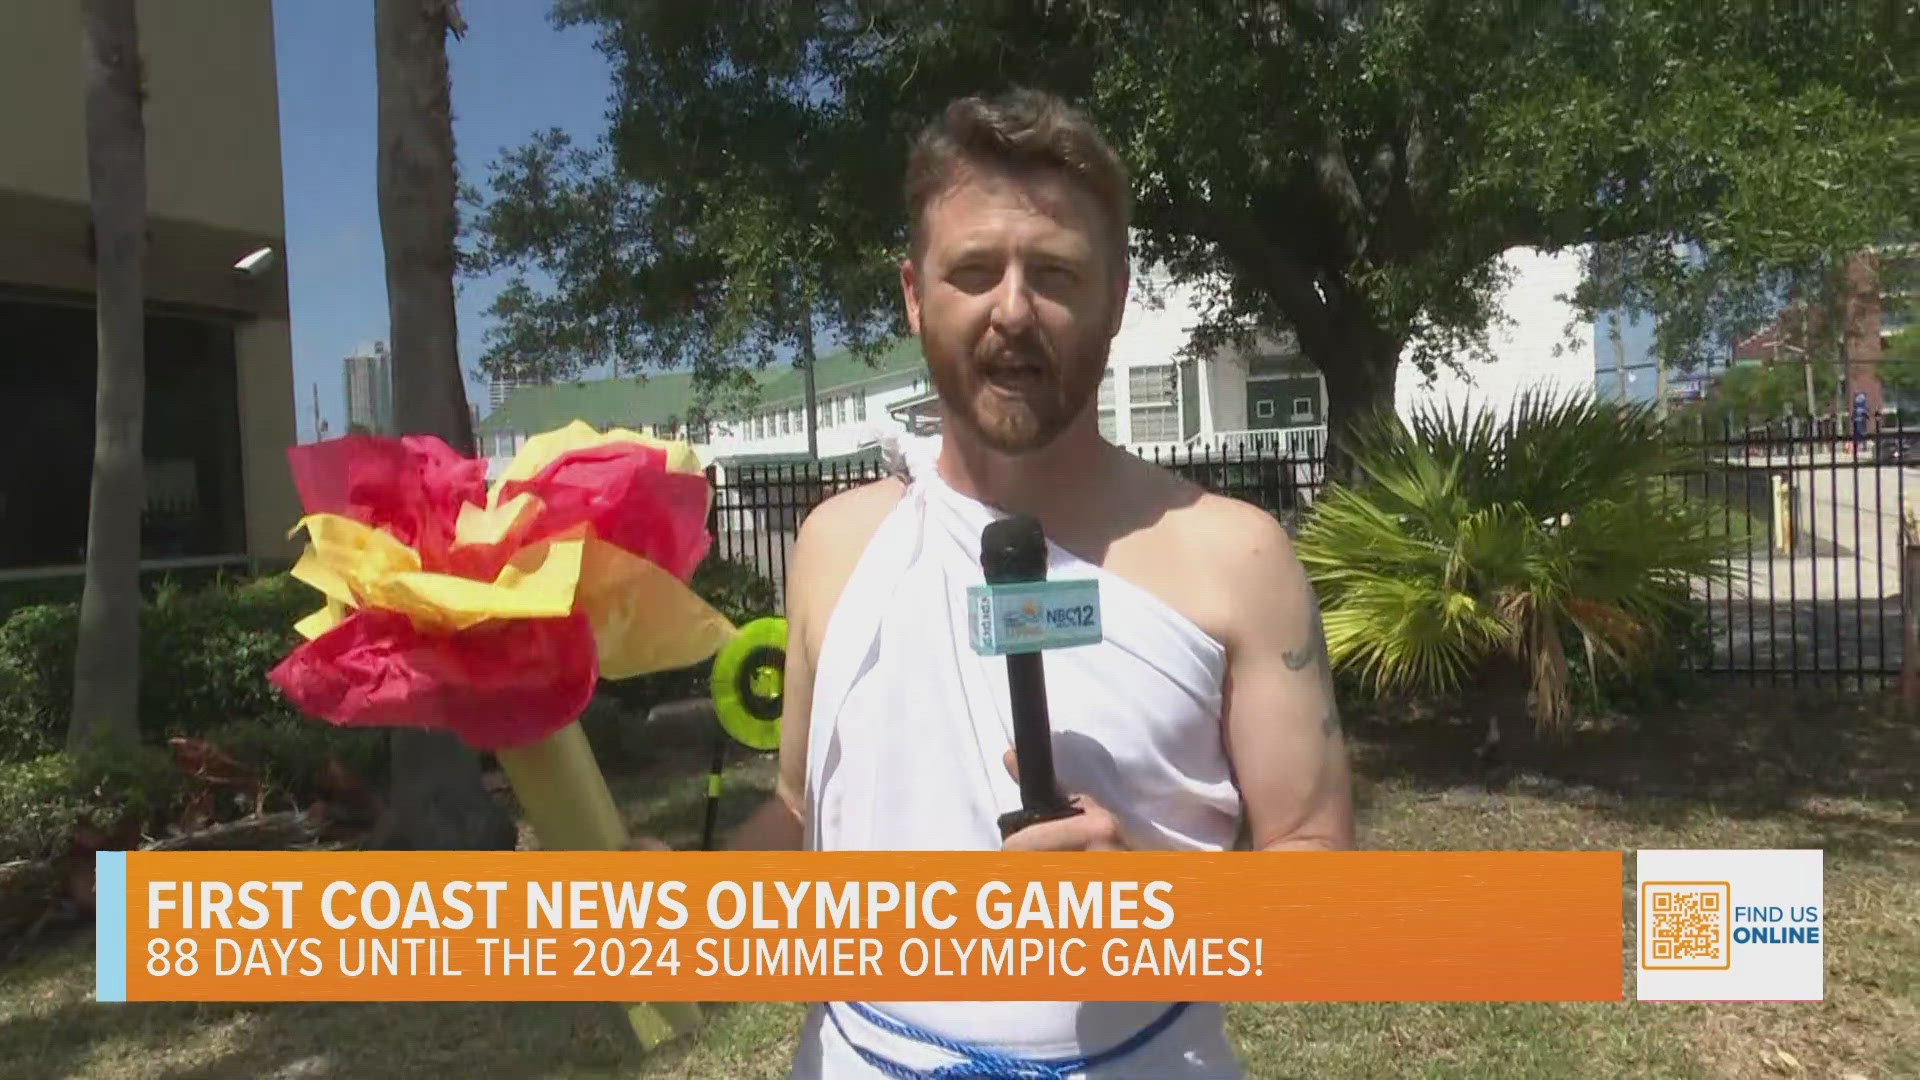 88 DAYS Until the 2024 Summer Olympic Games!